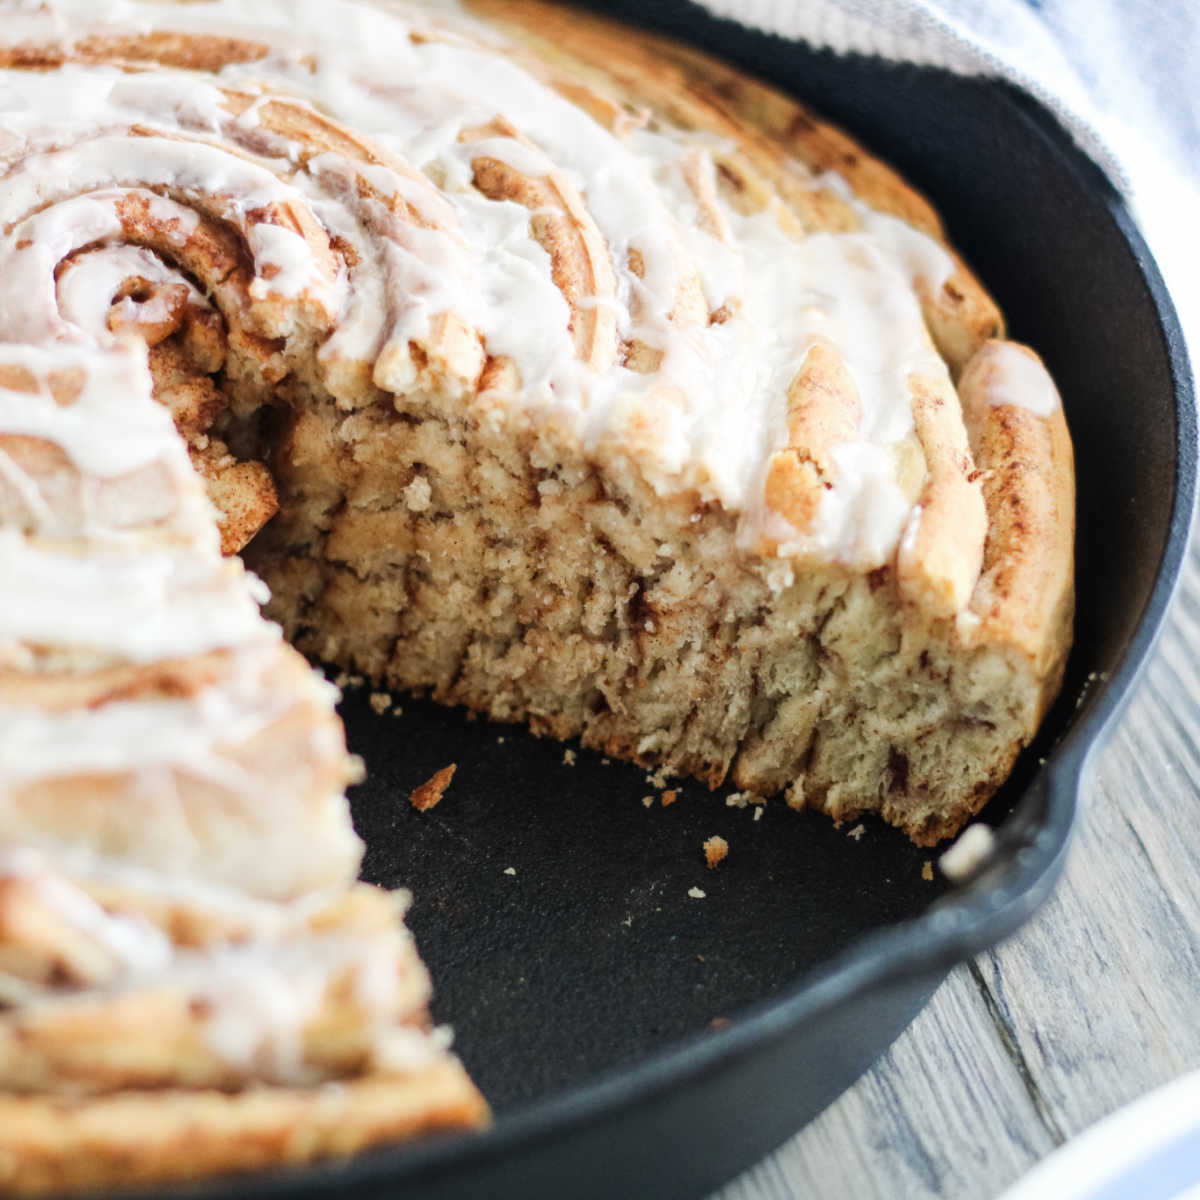 https://cookingwithcarlee.com/wp-content/uploads/2015/04/slice-missing-from-skillet-cinnamon-roll.jpg